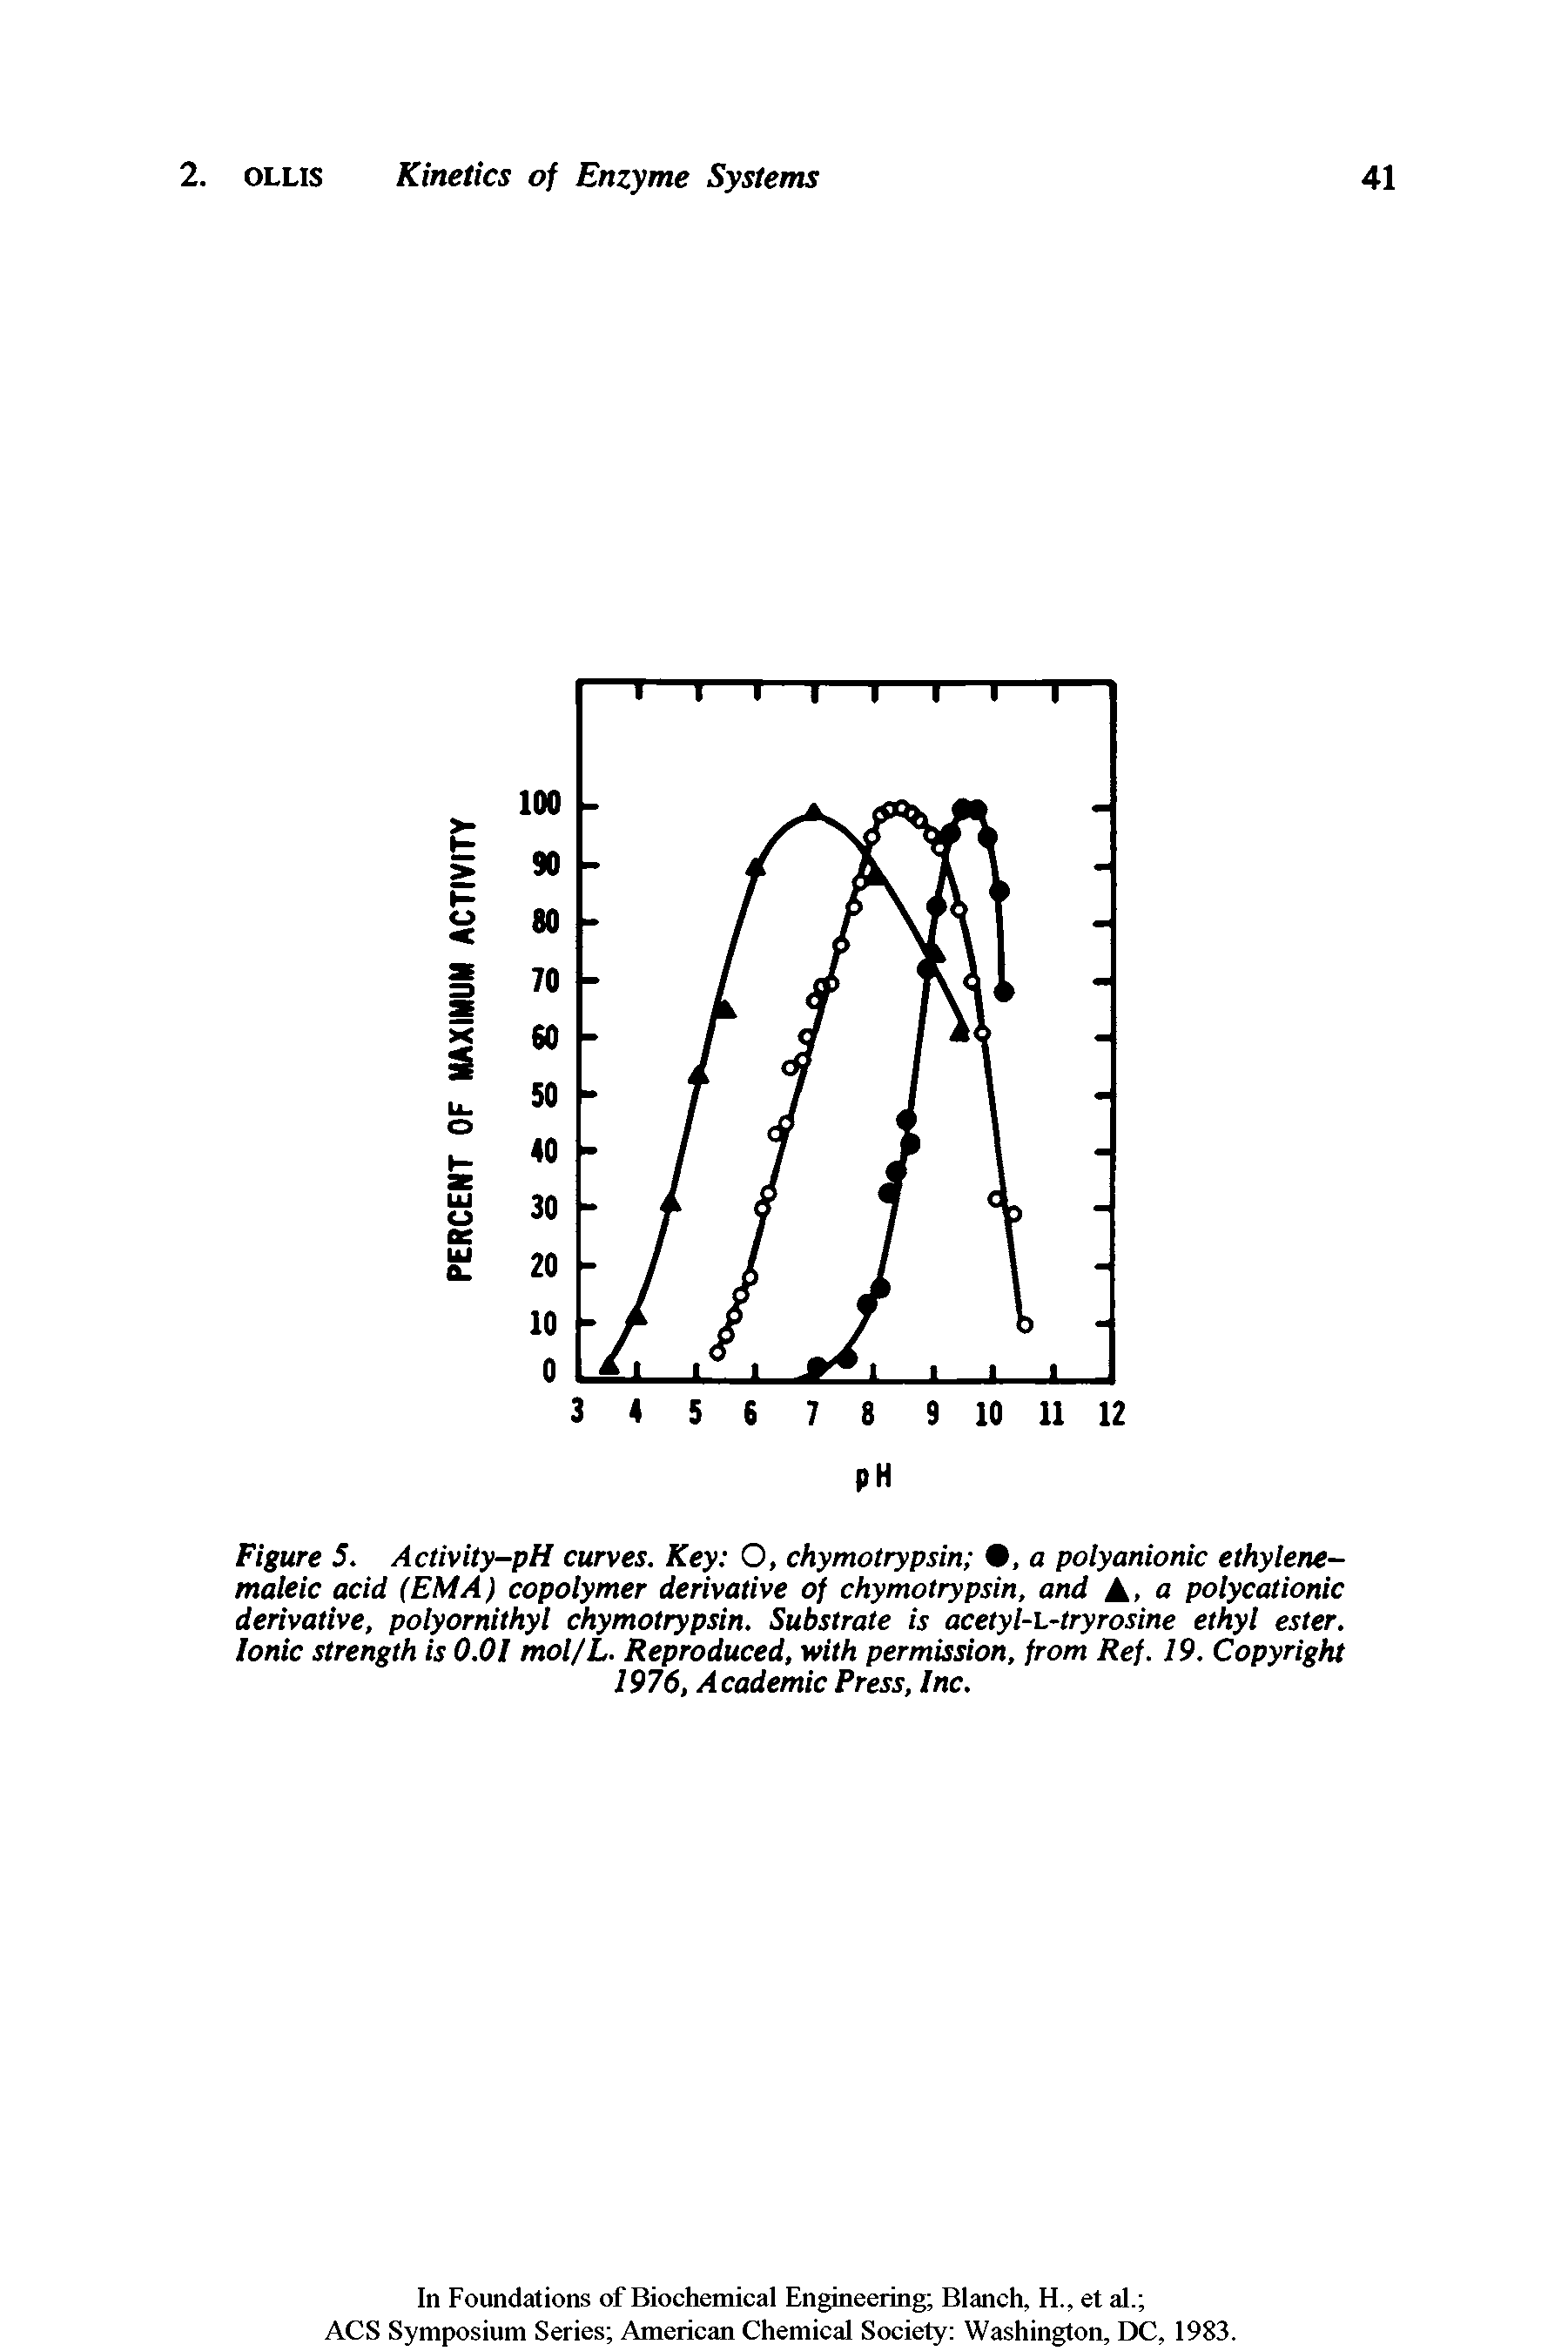 Figure 5. Activity-pH curves. Key O, chymotrypsin , a polyanionic ethylene-maleic acid (EM A) copolymer derivative of chymotrypsin, and A> a polycat ionic derivative, polyornithyl chymotrypsin. Substrate is acetyl-L-tryrosine ethyl ester. Ionic strength is 0.01 mol/L. Reproduced, with permission, from Ref. 19. Copyright 1976, Academic Press, Inc.